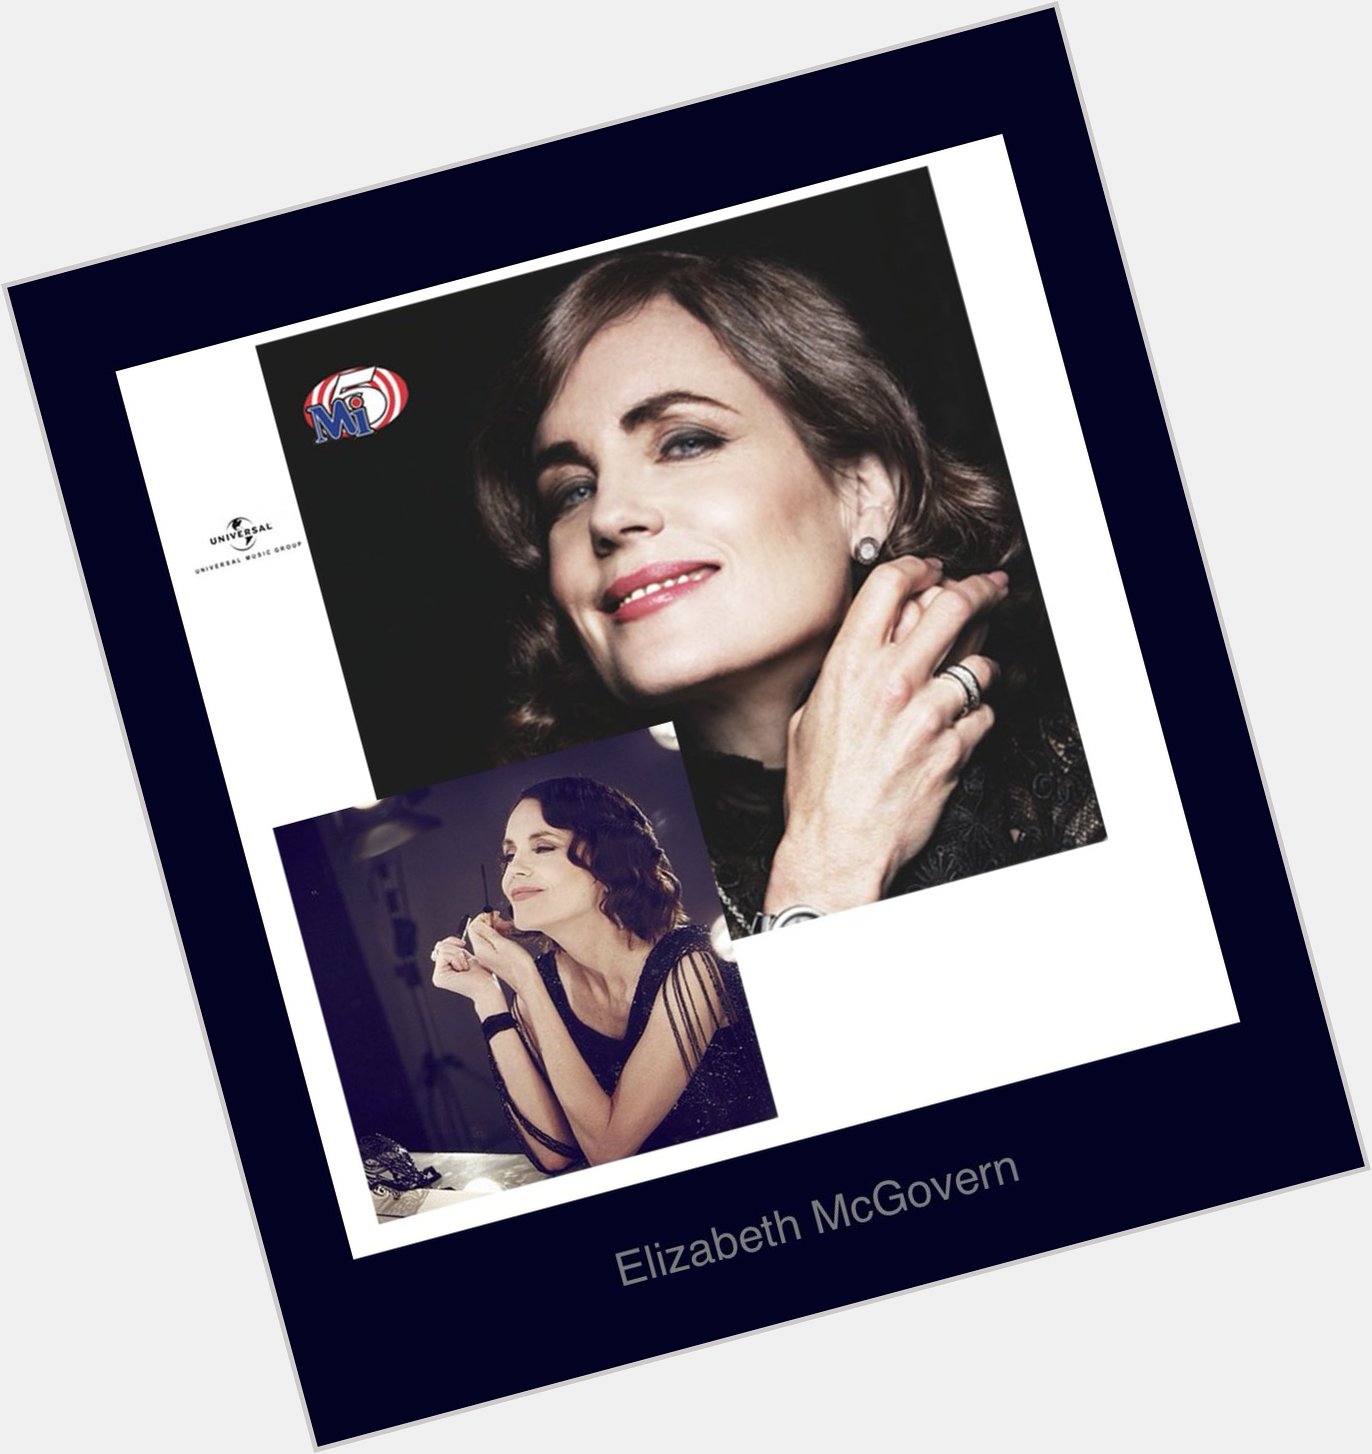 Happy Birthday to the talented Elizabeth McGovern another artist from our label at Mi5 Recordings - You Rock! 